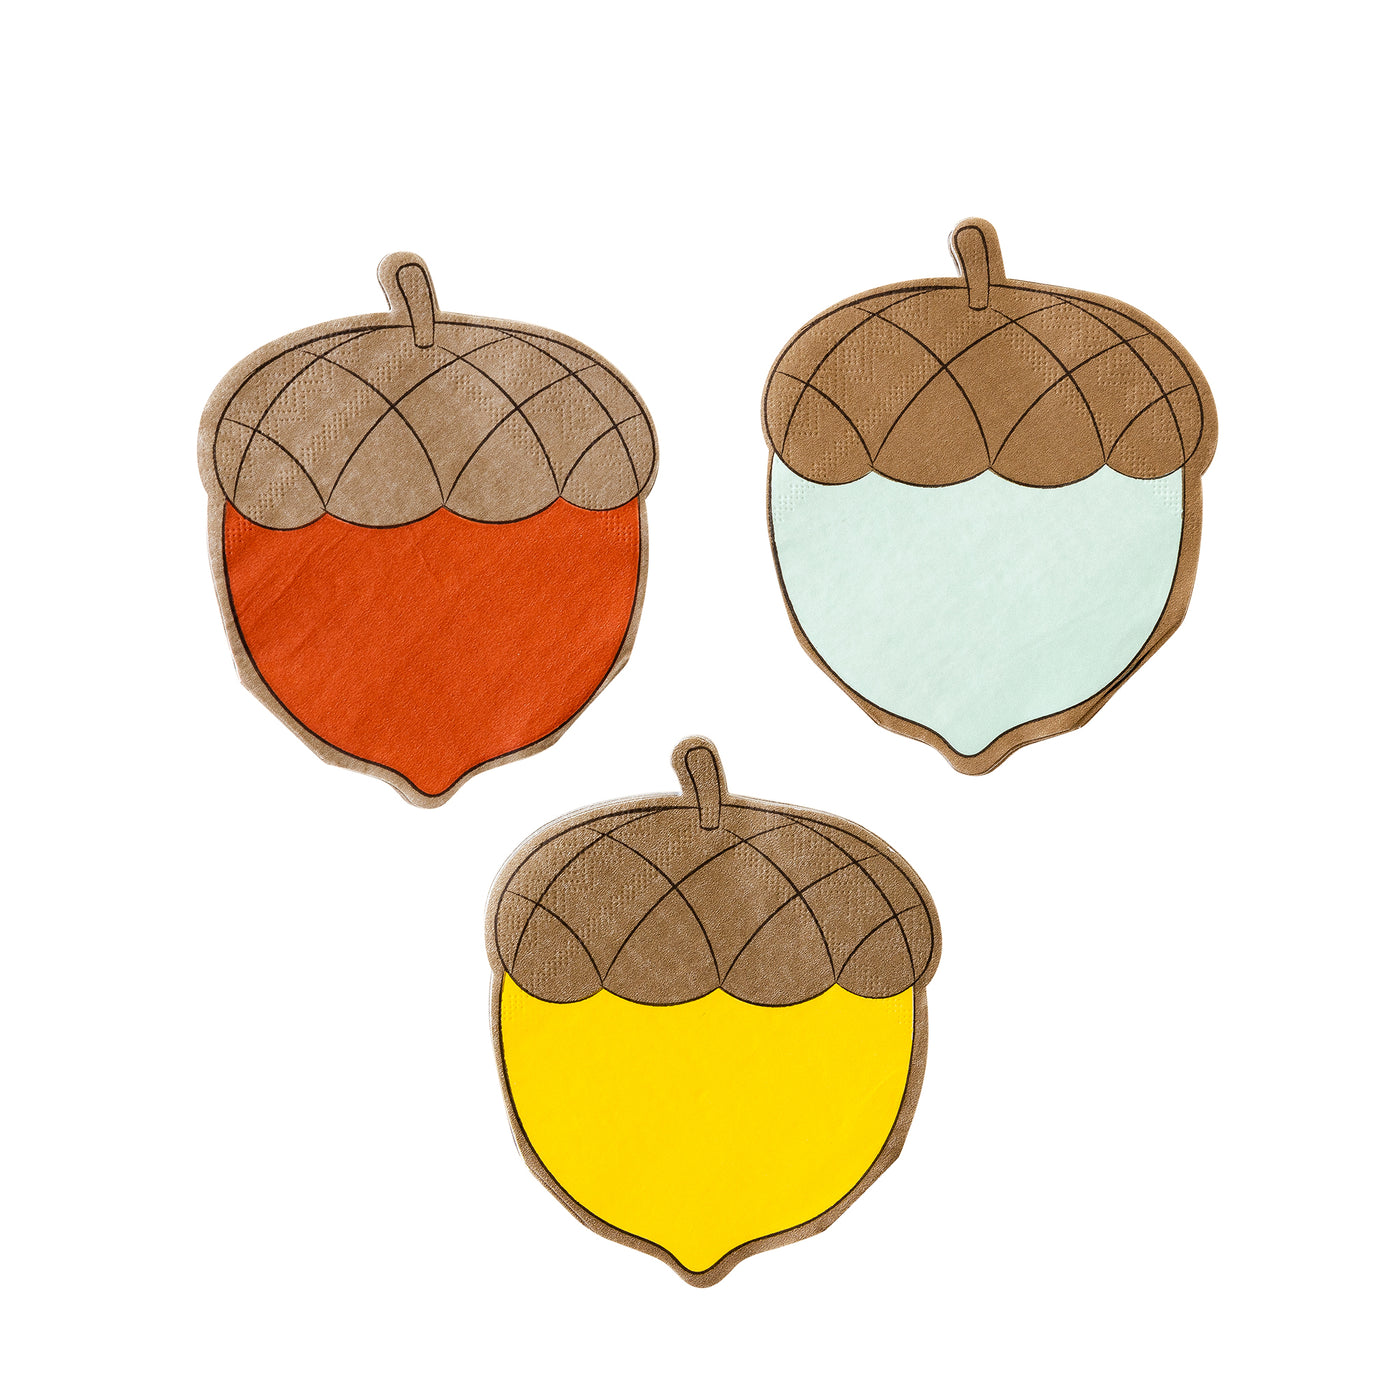 THP1035 -Occasions By Shakira - Harvest Acorn Shaped Cocktail Napkin Set